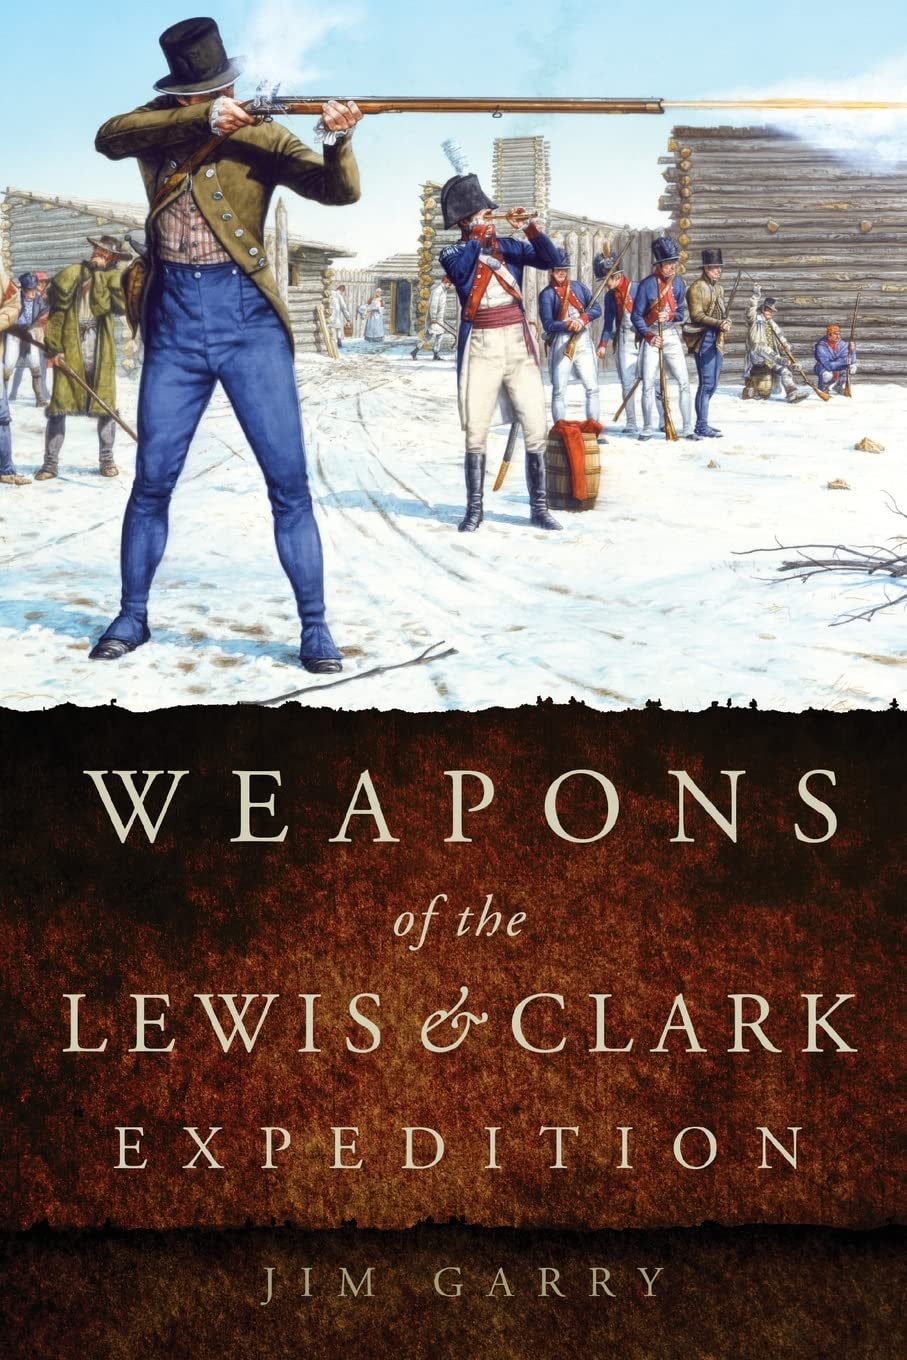 Weapons of the Lewis and Clark Expedition